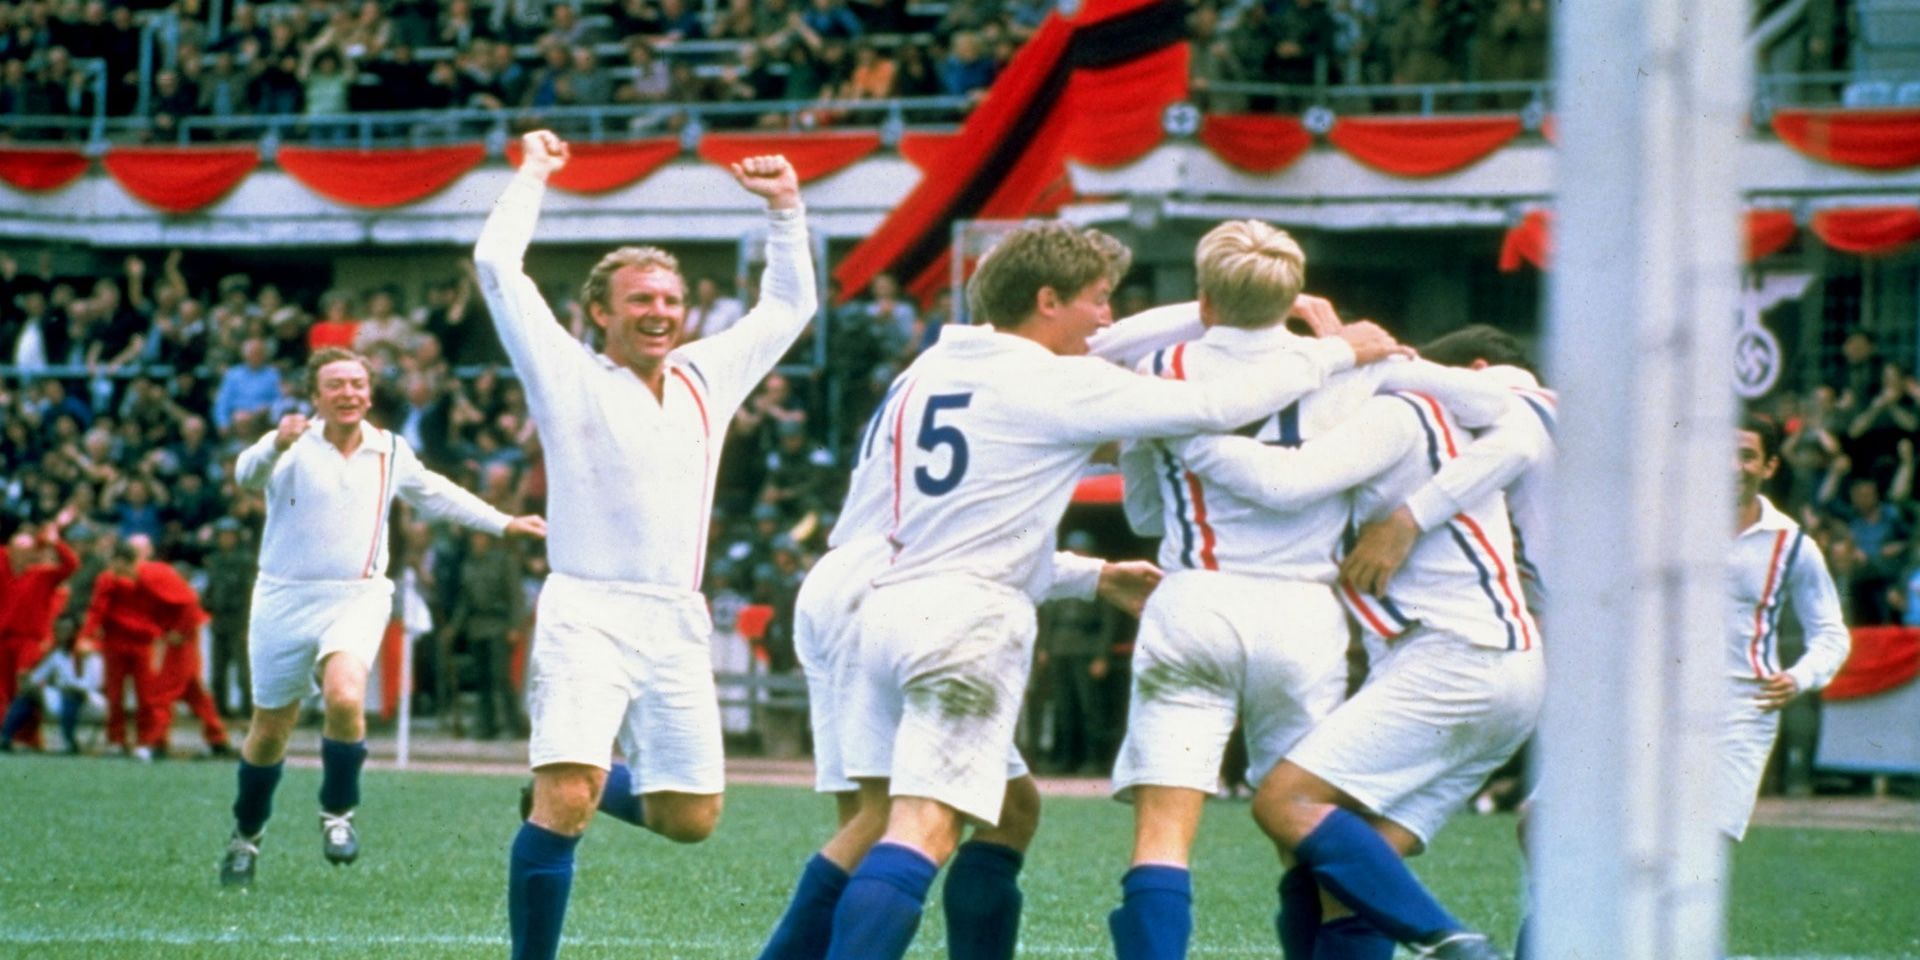 People celebrating a goal in Escape to Victory